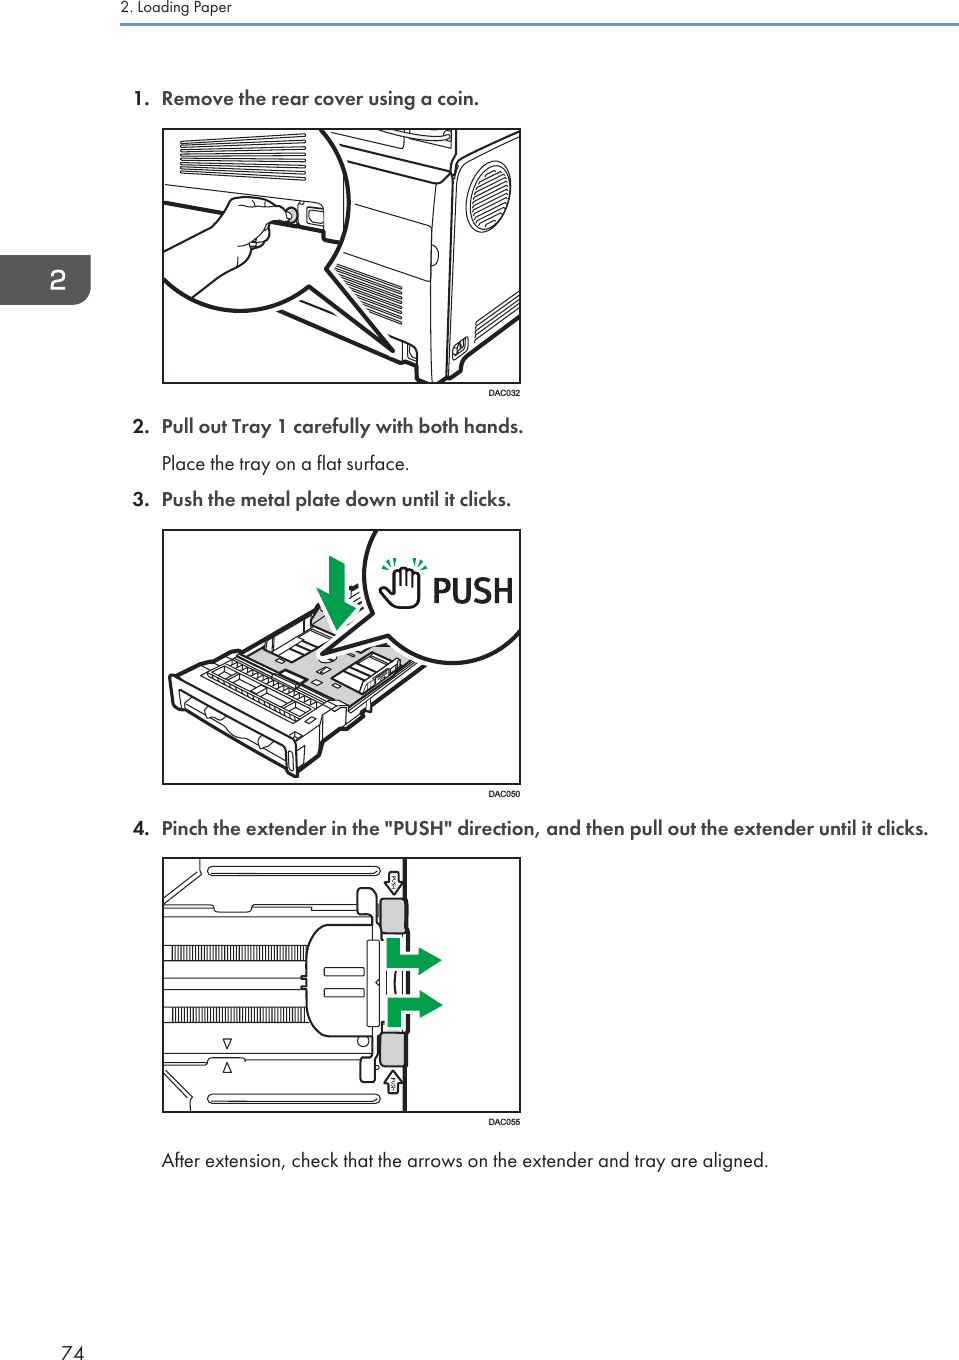 1. Remove the rear cover using a coin.DAC0322. Pull out Tray 1 carefully with both hands.Place the tray on a flat surface.3. Push the metal plate down until it clicks.DAC0504. Pinch the extender in the &quot;PUSH&quot; direction, and then pull out the extender until it clicks.DAC055After extension, check that the arrows on the extender and tray are aligned.2. Loading Paper74